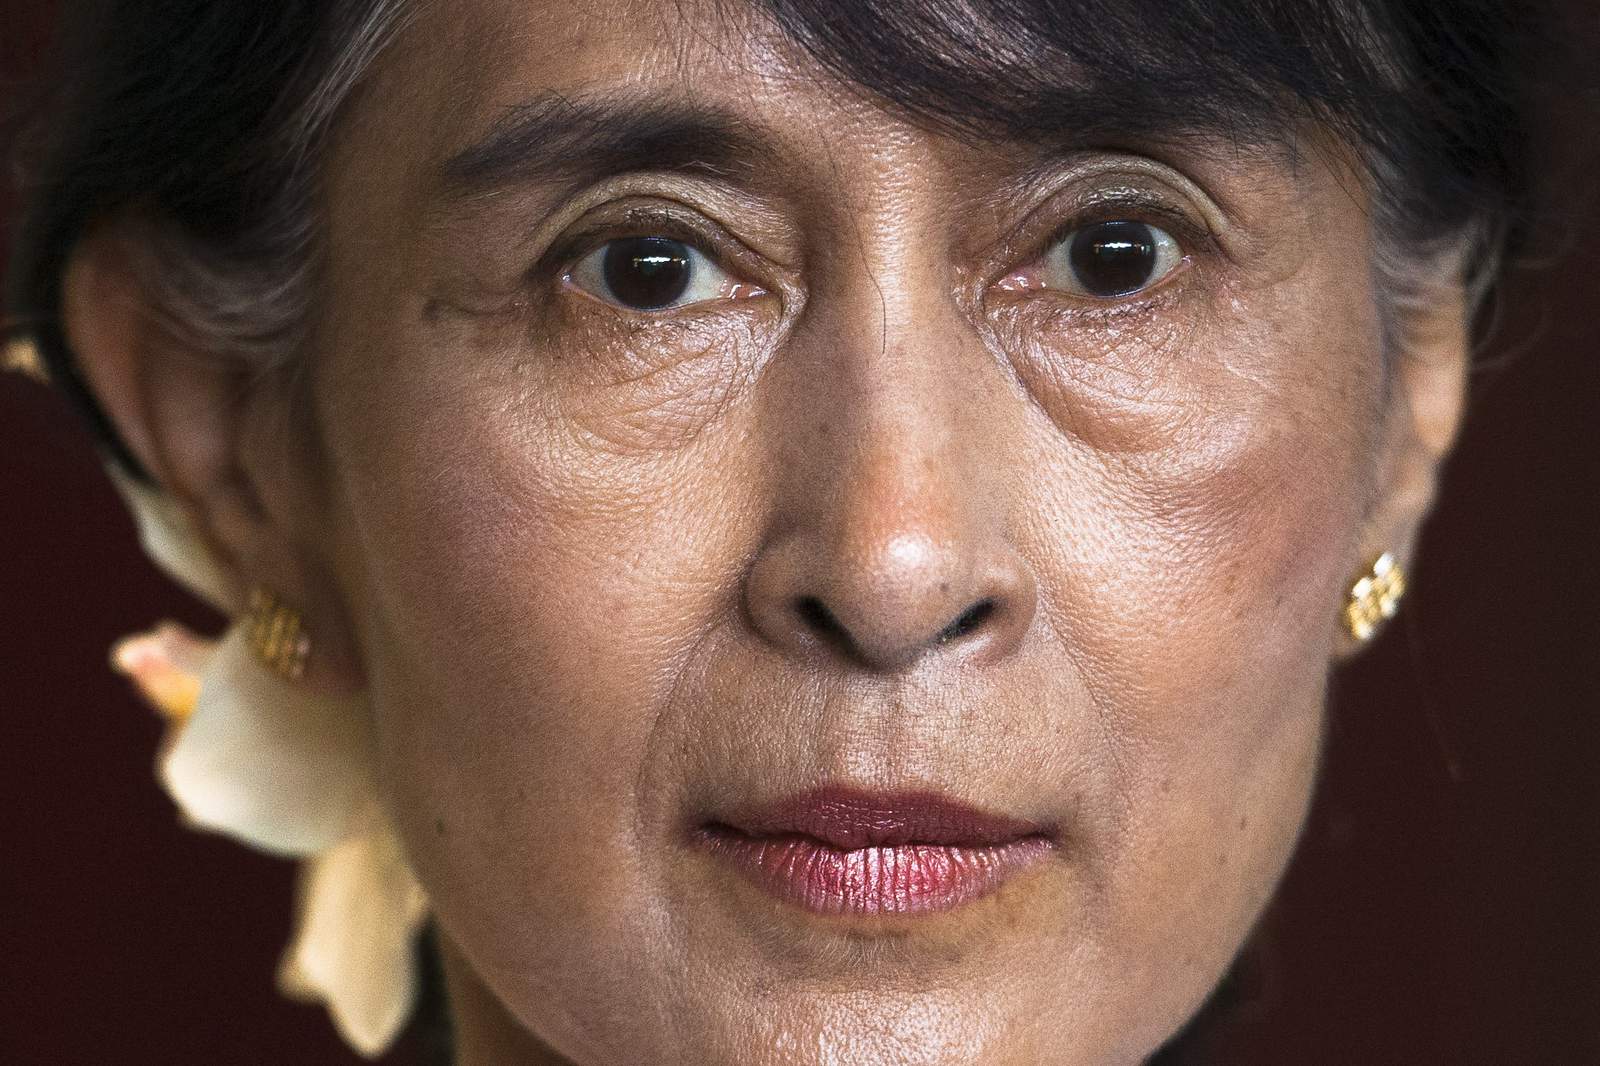 Deposed Myanmar leader warned of possible army obstruction